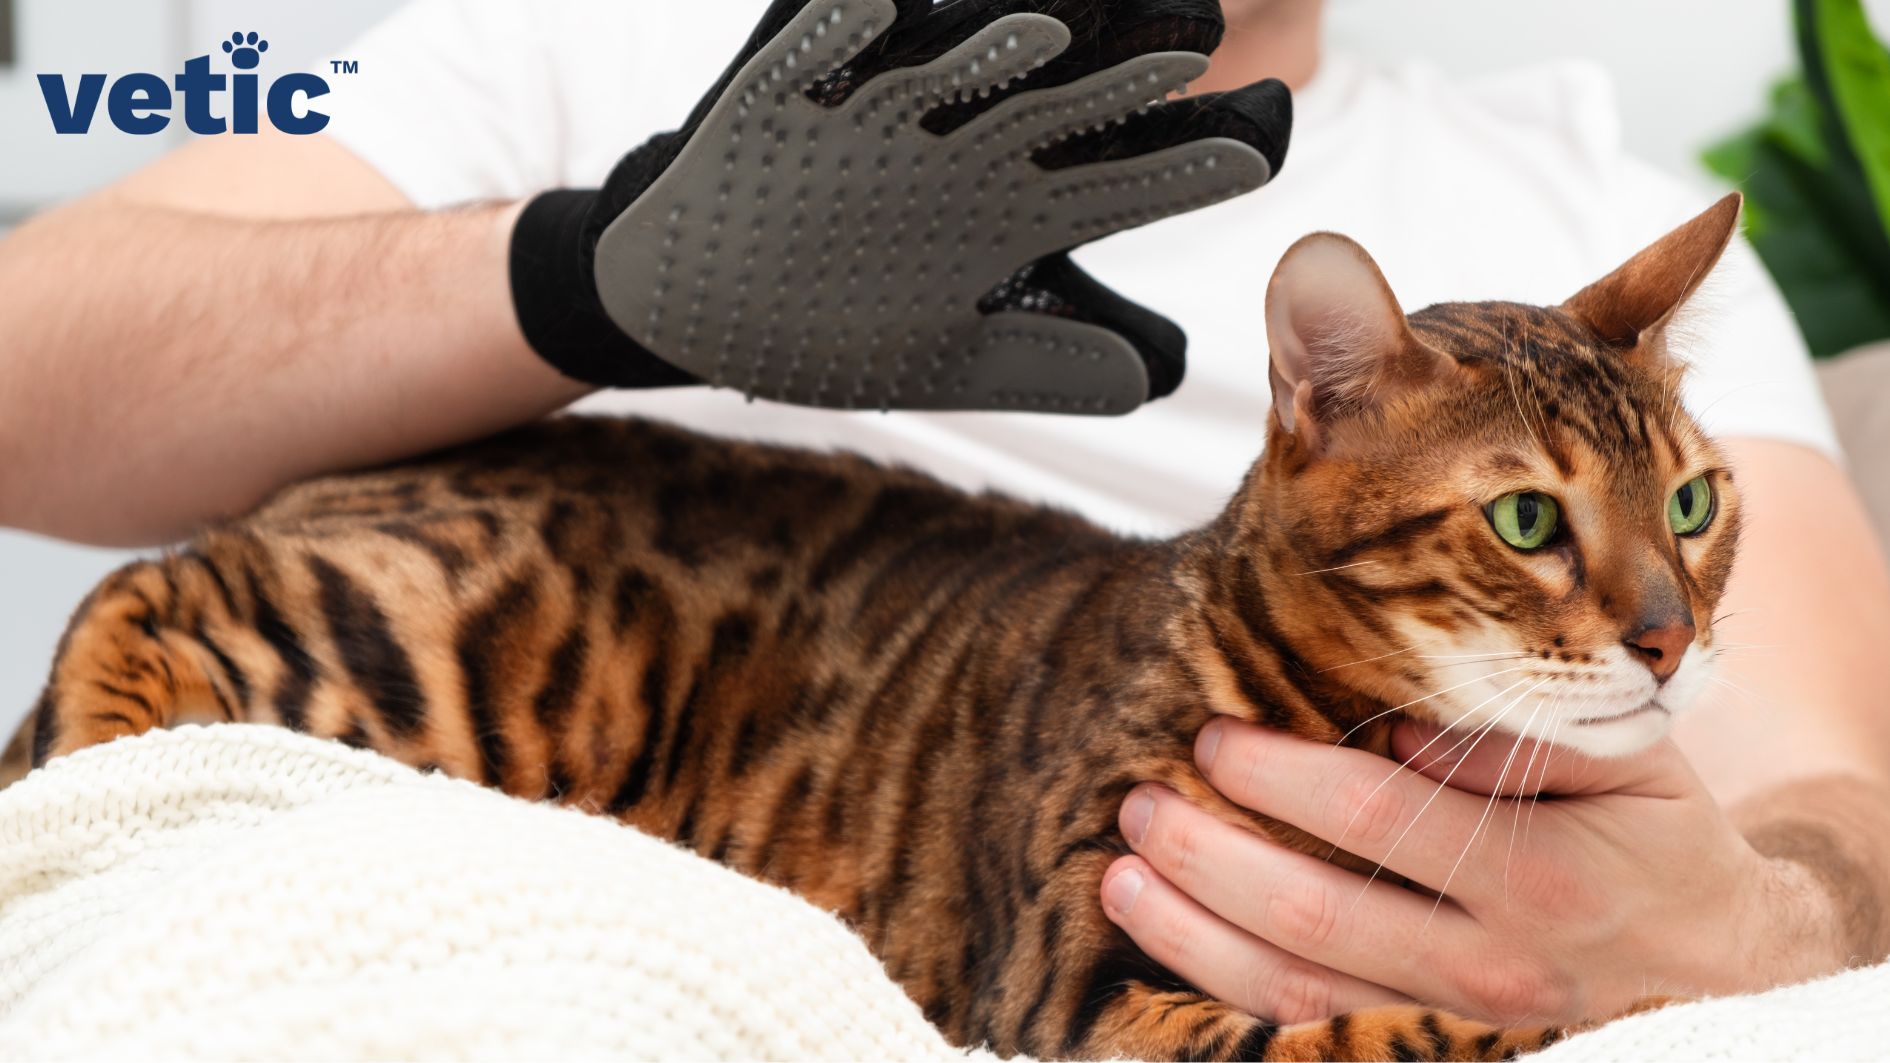 A hand wearing a cat brushing comb to brush a bengal cat with green eyes sitting on the person's lap. The person is holding the cat near the cat's chest with another hand. Daily brushing can reduce cat hairballs.